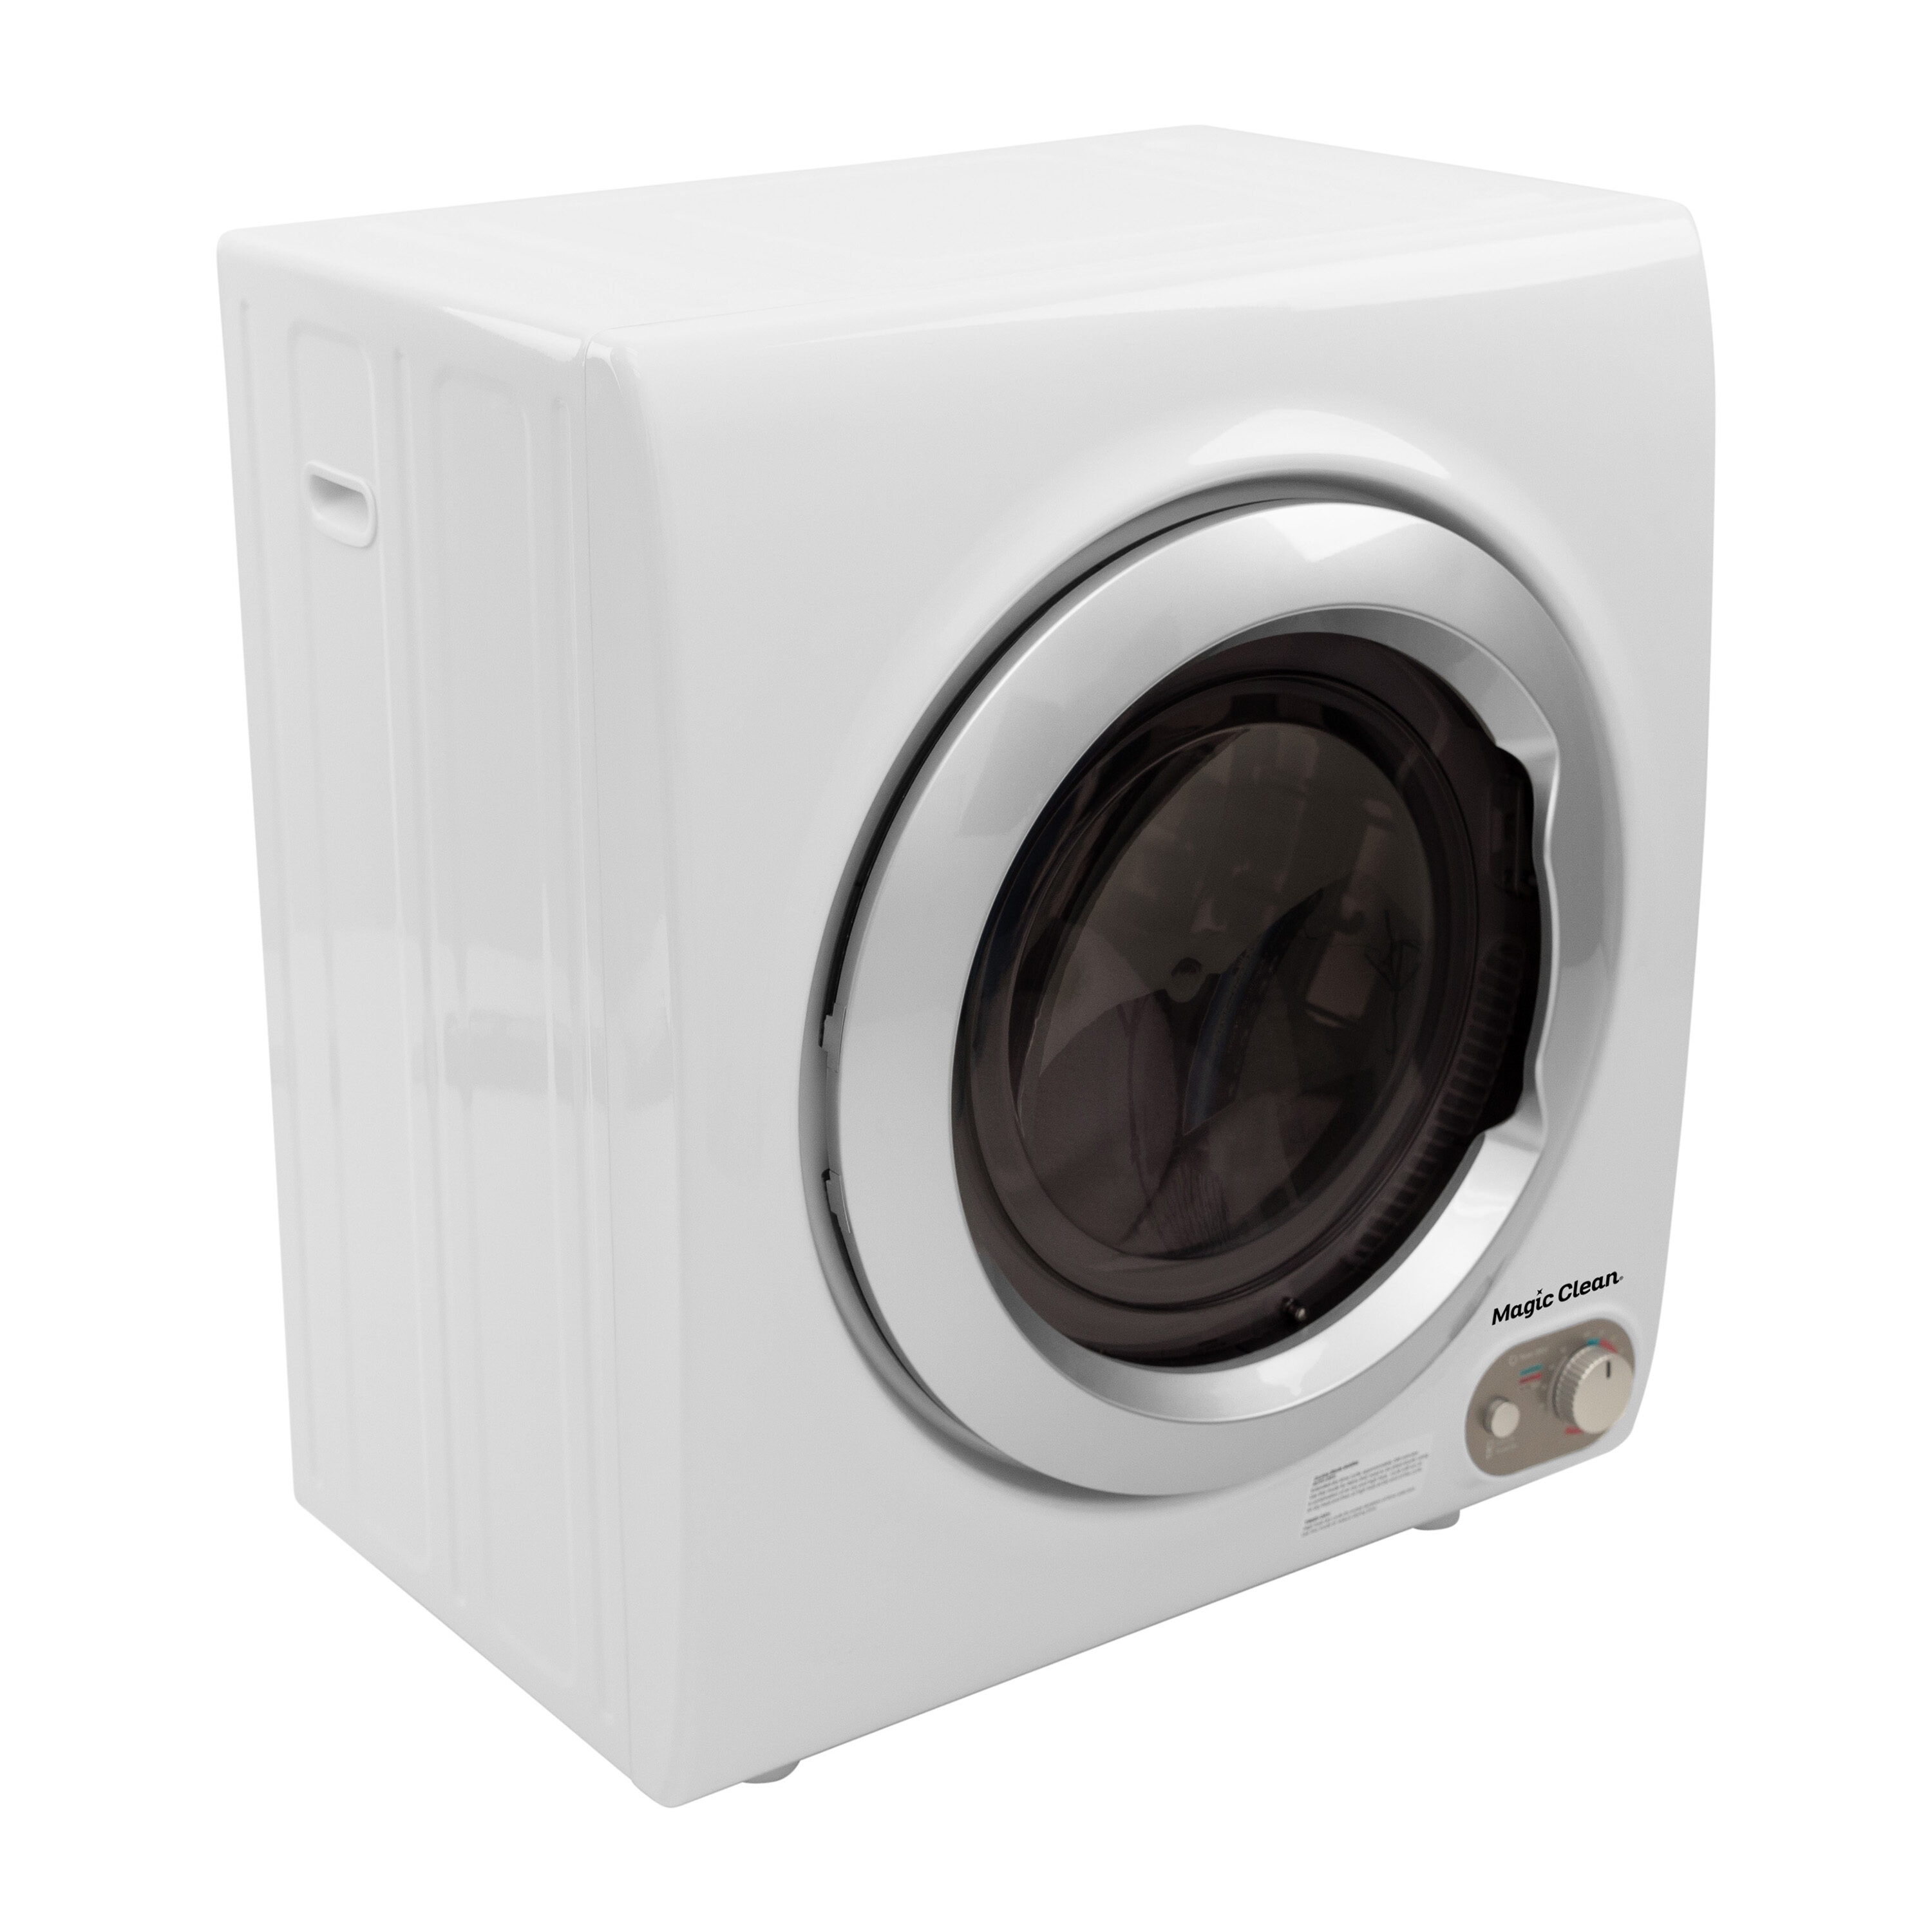 DYD Portable Dryer in White